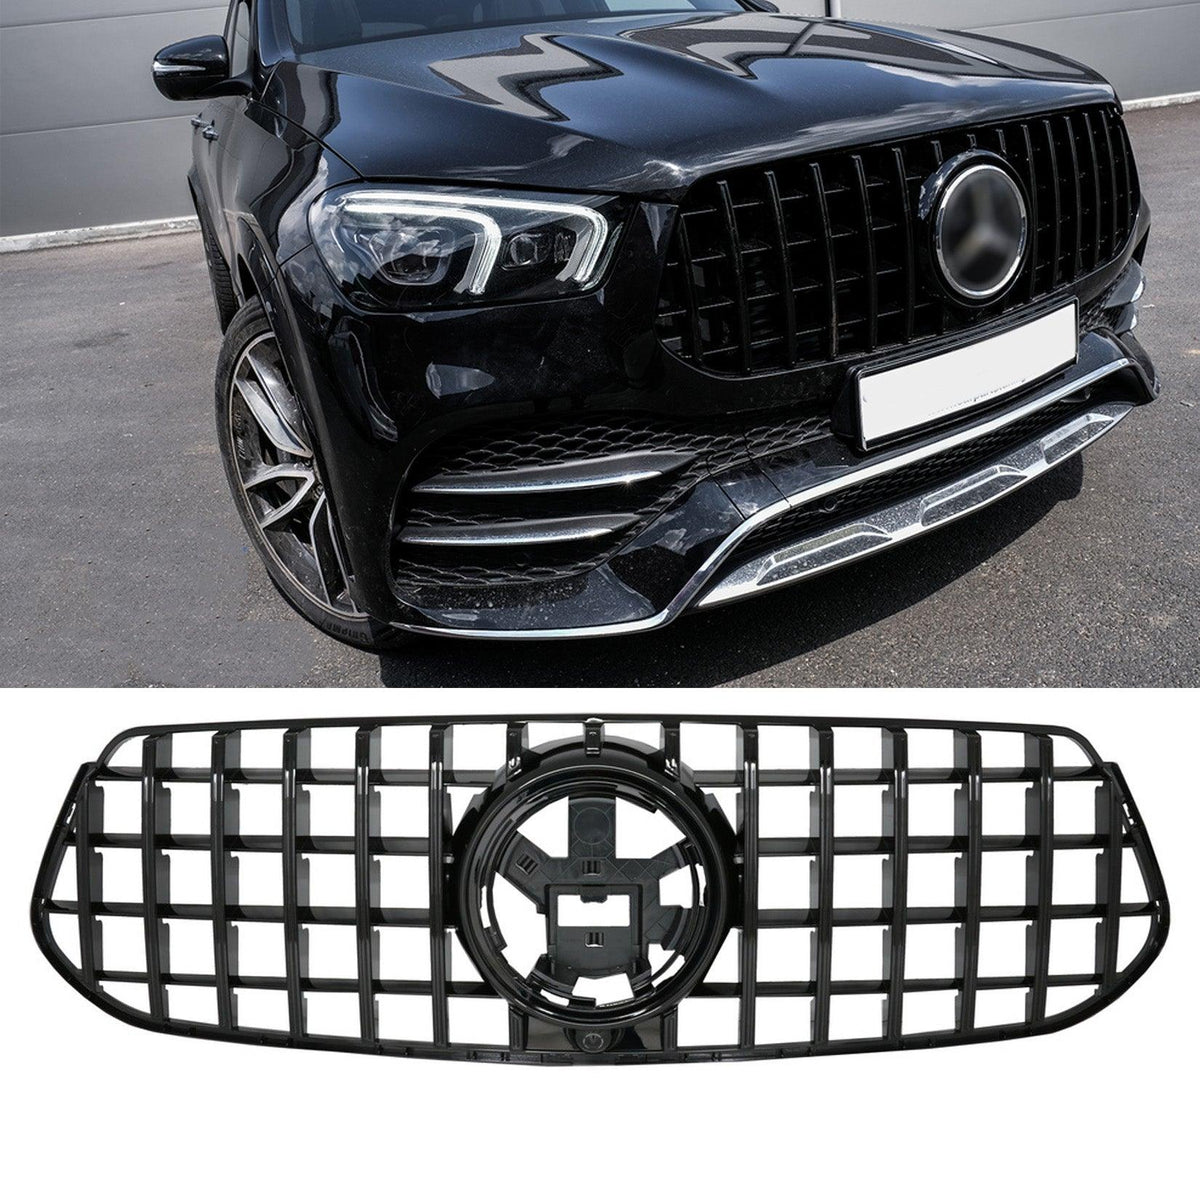 MERCEDES GLE X167 2019+ - FRONT GRILL - PANAMERICANA GT-R STYLE - ALL BLACK - RisperStyling